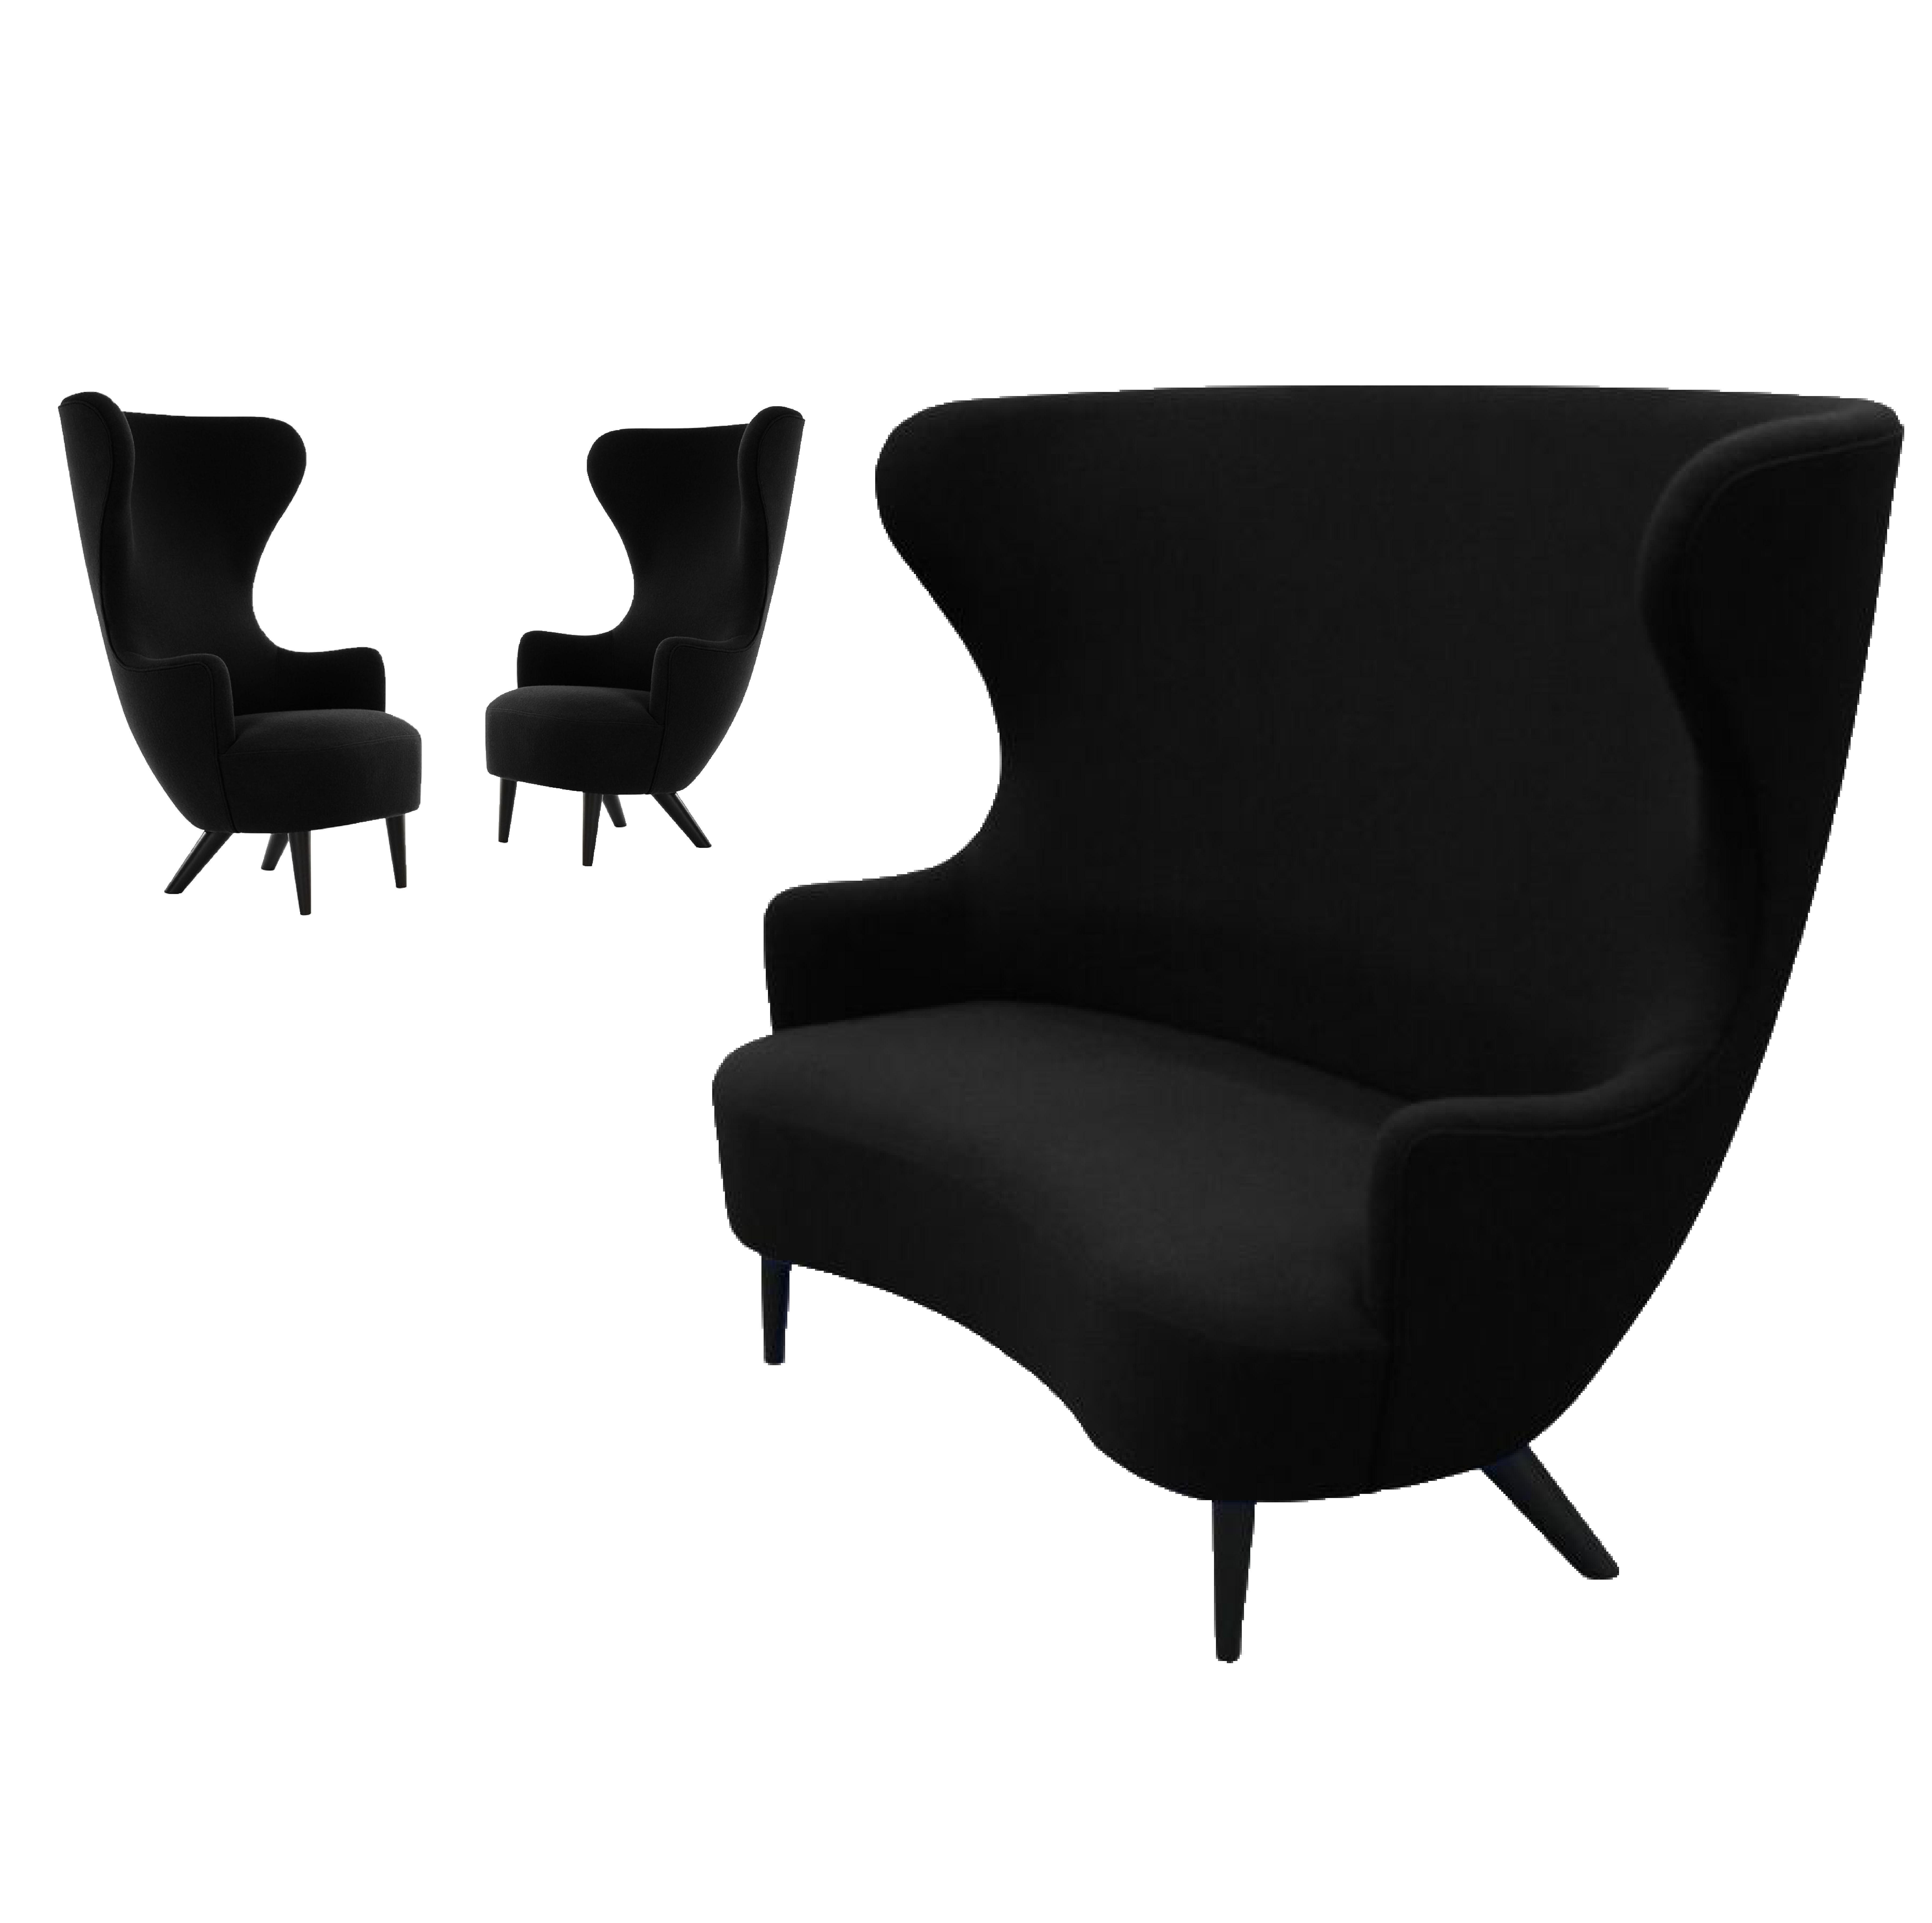 Tom Dixon wingback black leg Hallingdal 65 sofa & armchair lounge, George Smith.

Wingback was inspired by traditional 17th century wingback and balloon-back archetypes and was developed for Shoreditch House Members Club. Its expressive sweeping